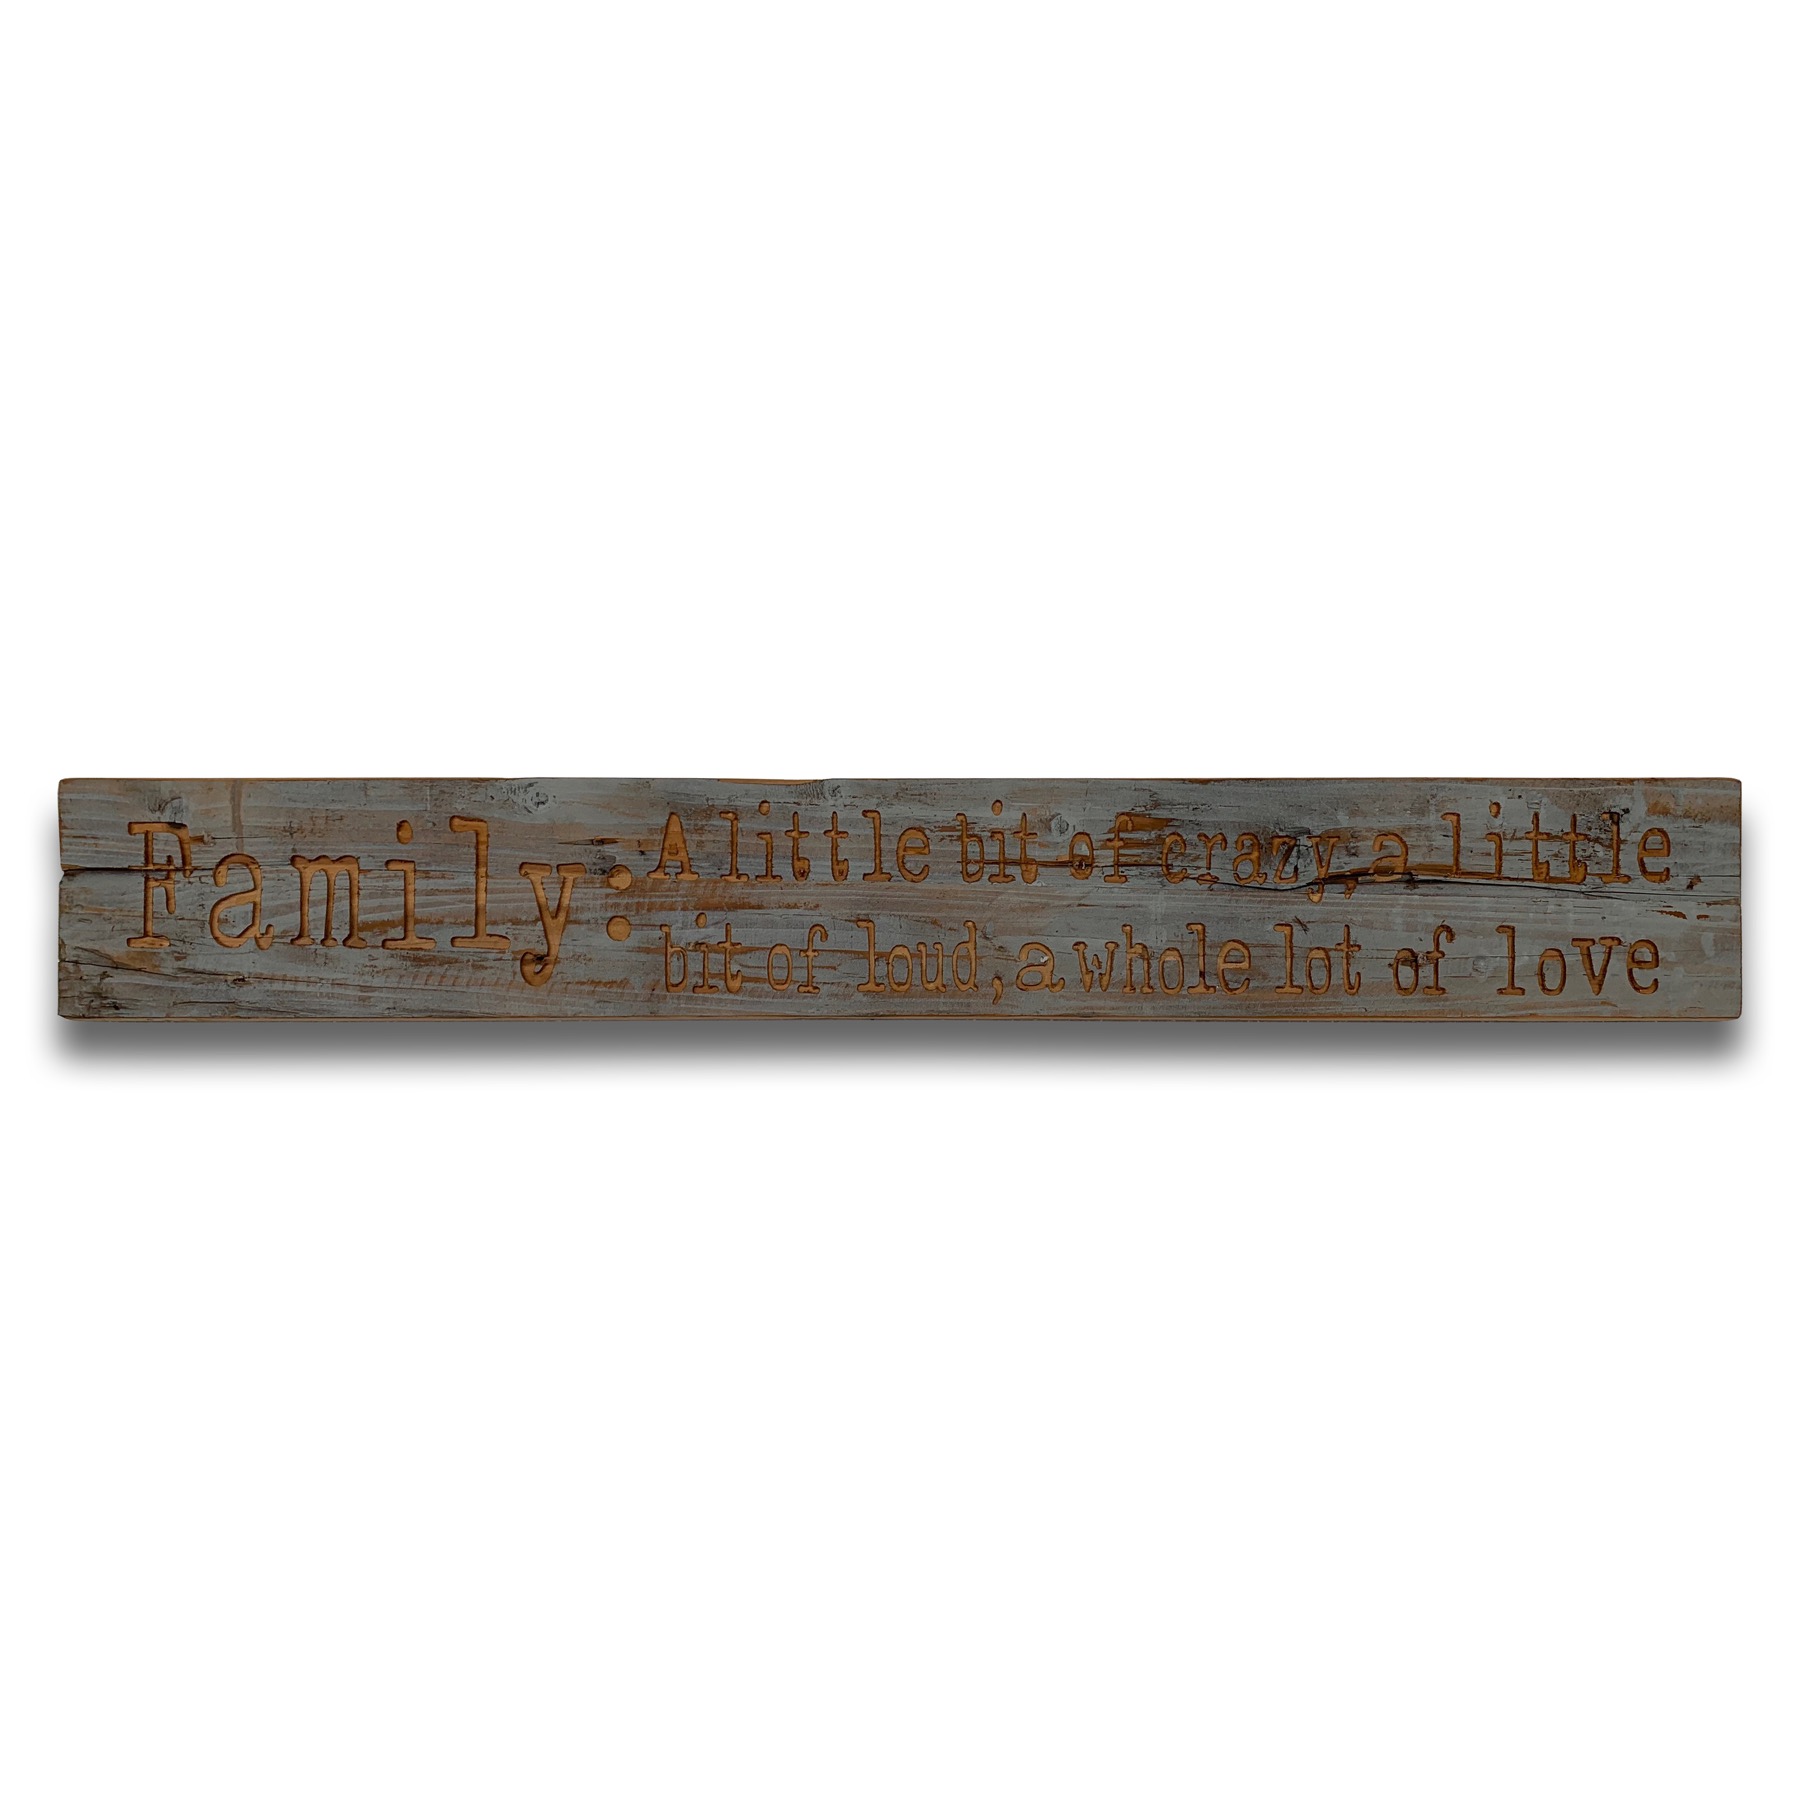 Family Large Grey Wash Wooden Message Plaque - Image 1